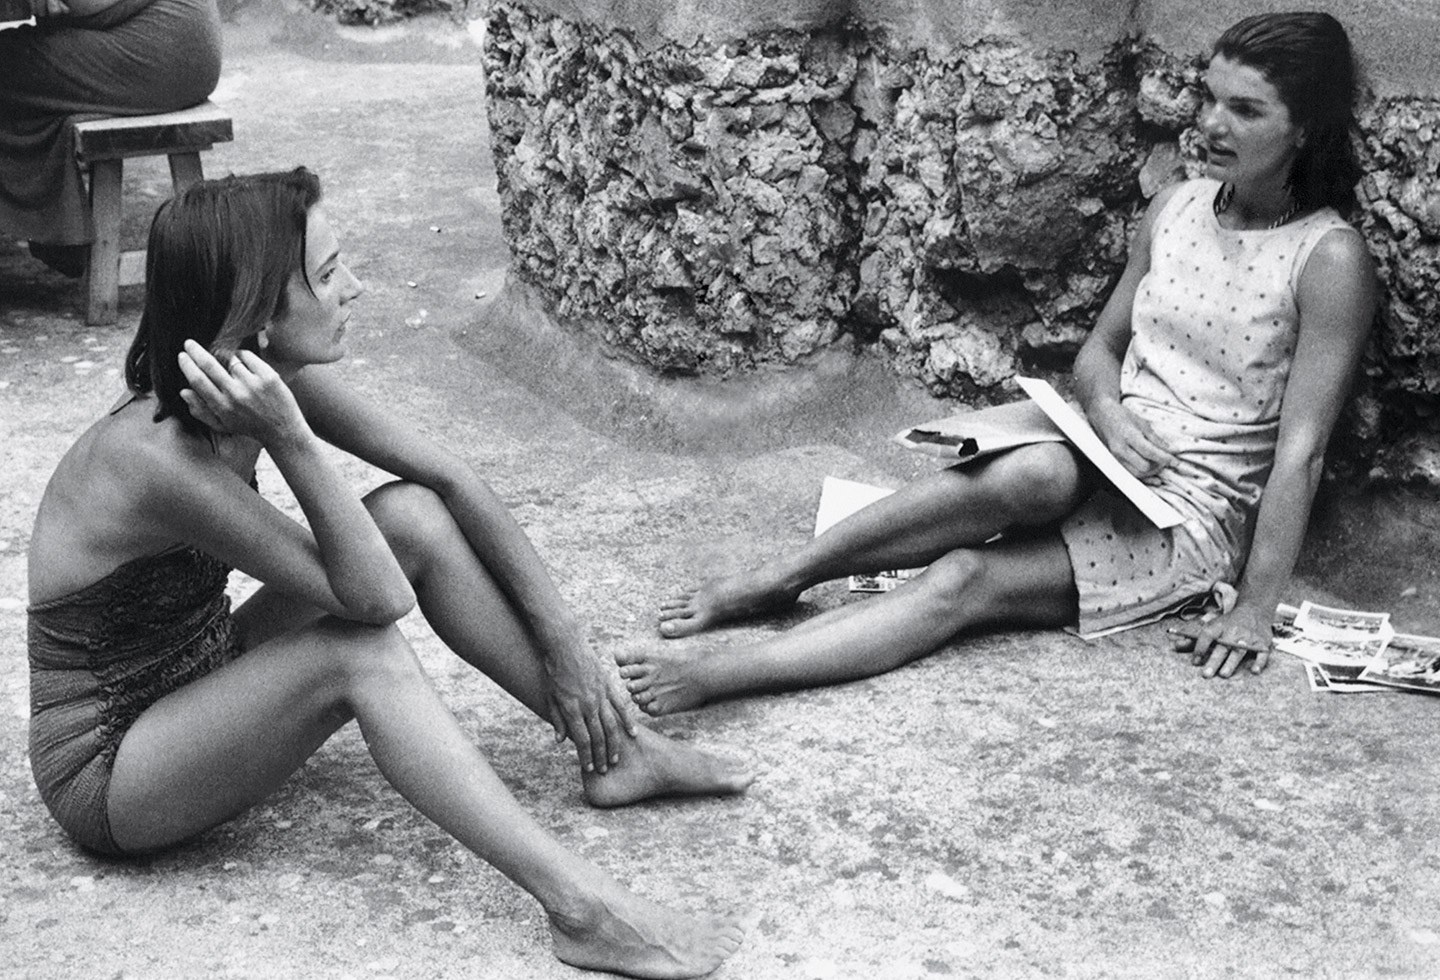 Princess Lee Radziwill and First Lady Jacqueline Kennedy, photographed in Italy in1962.